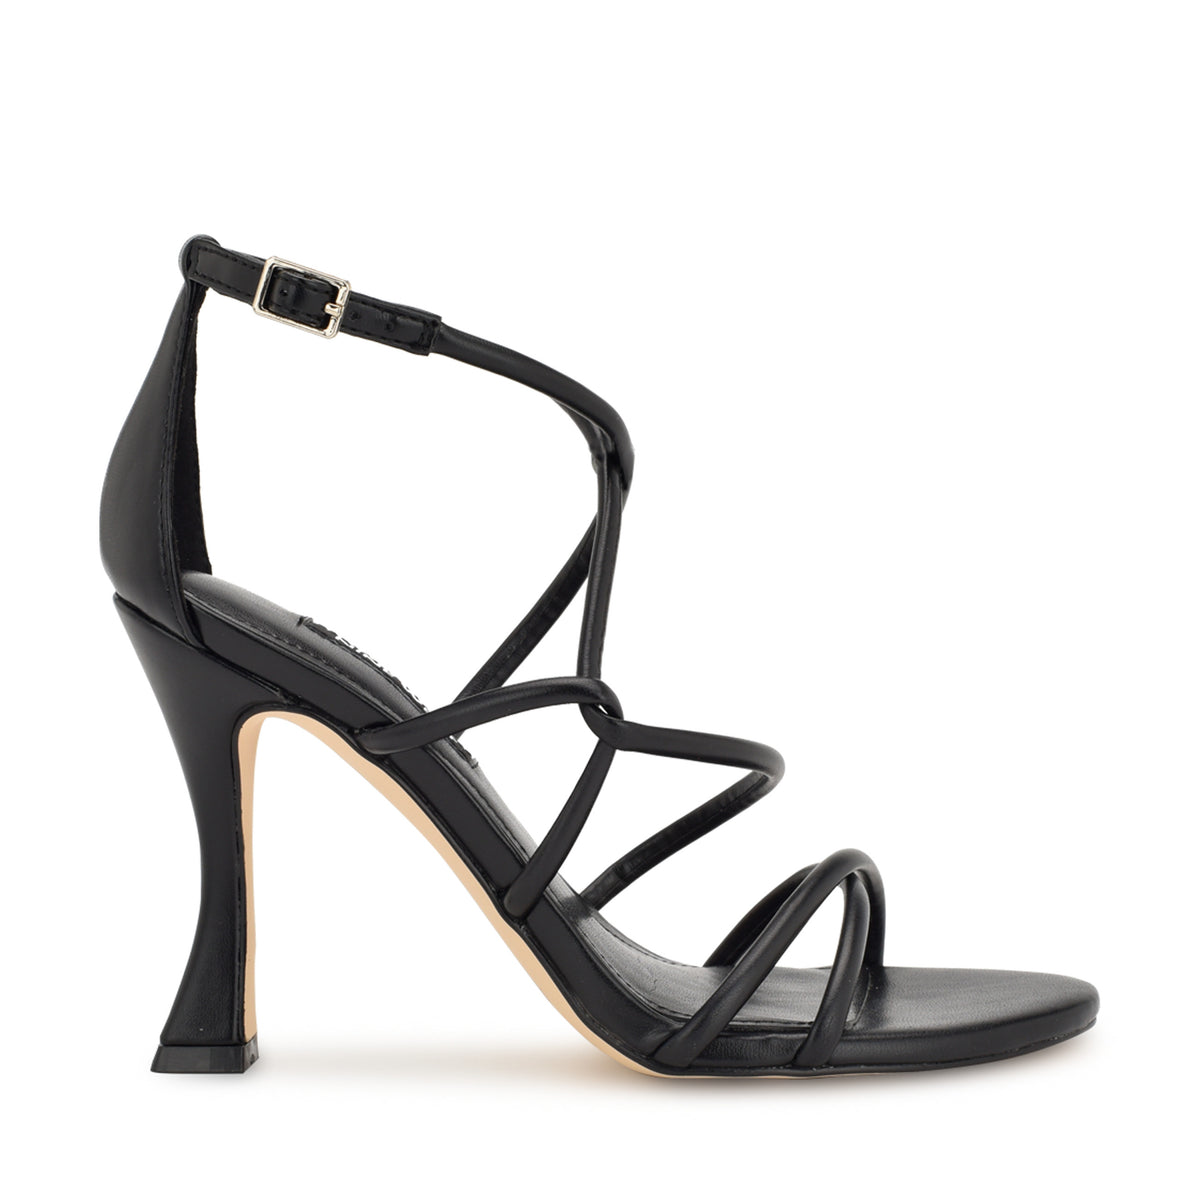 Buy Reiss Adela Satin Strappy Sandals from the Laura Ashley online shop